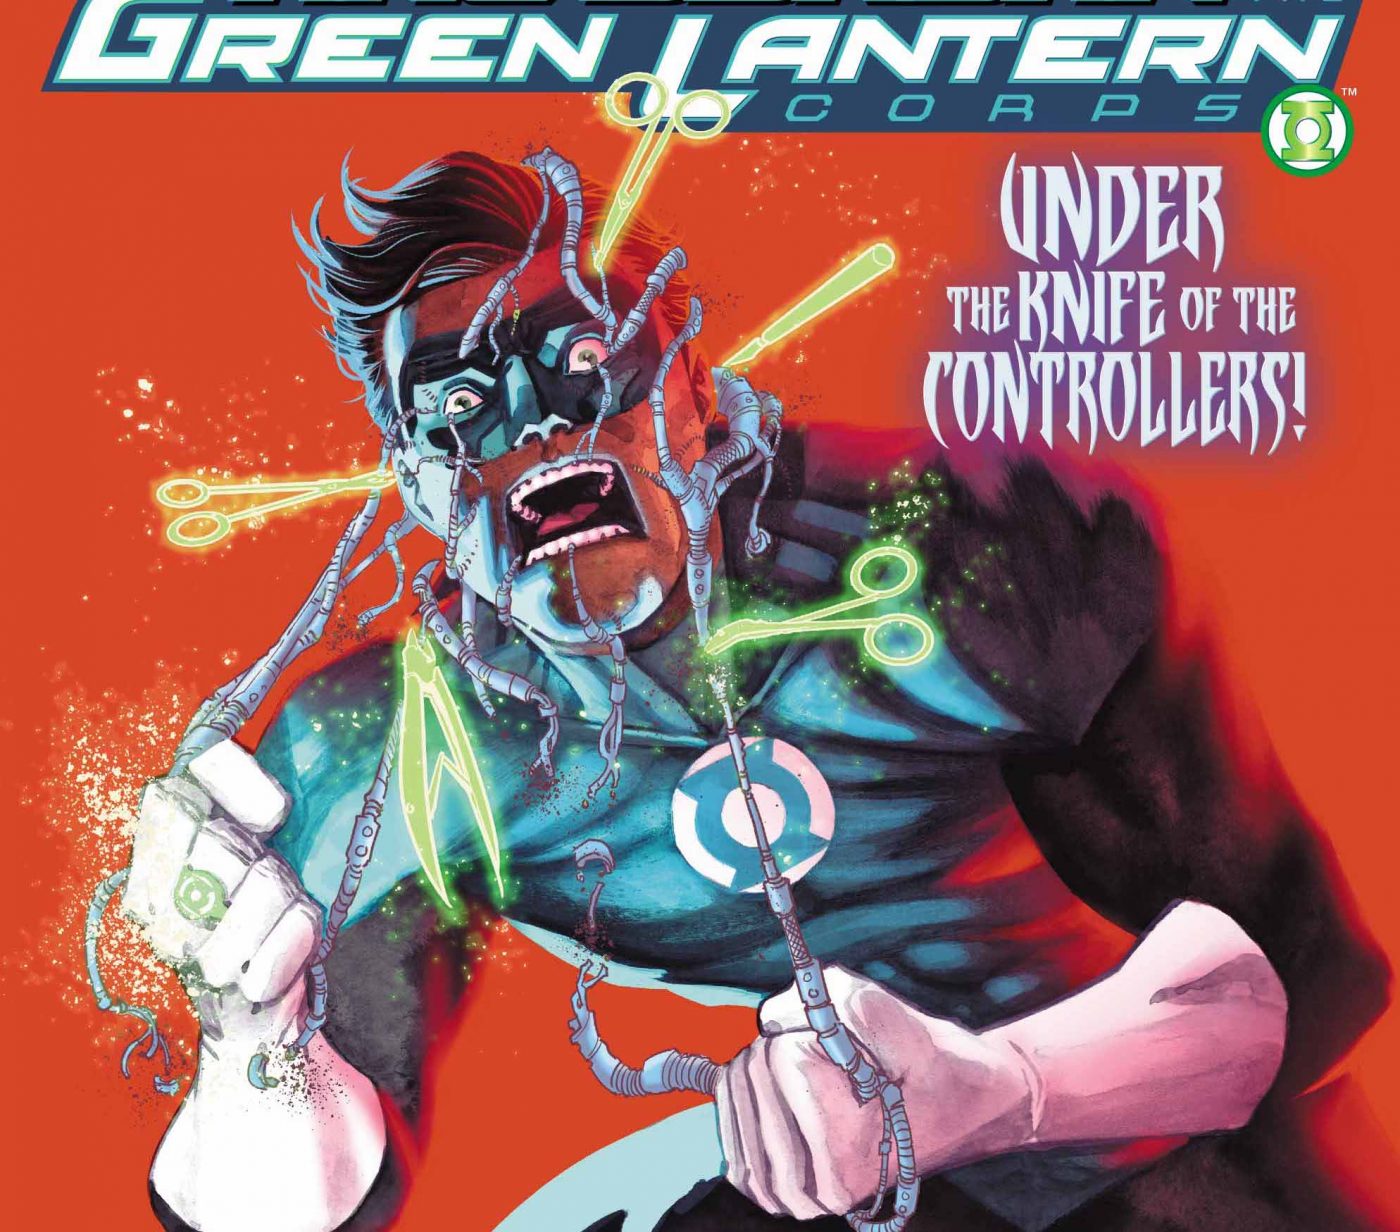 Hal Jordan and the Green Lantern Corps #33 Review